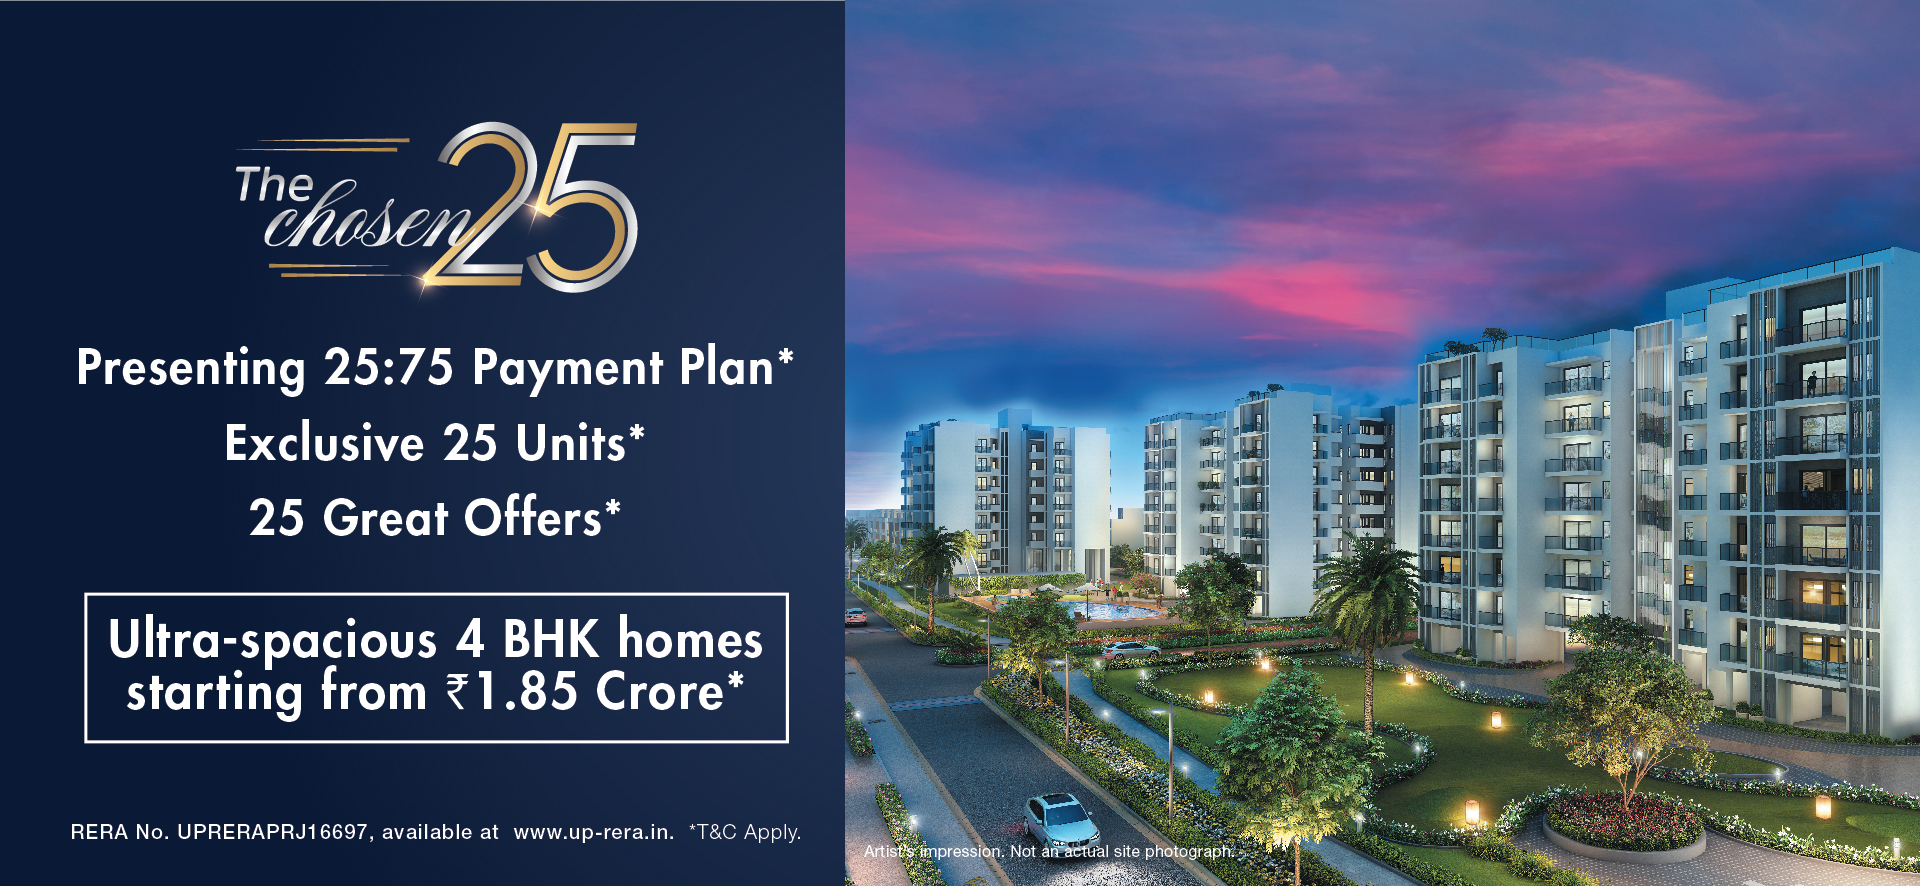 Presenting 25:75 Payment Plan at Godrej Golf Links in Greater Noida